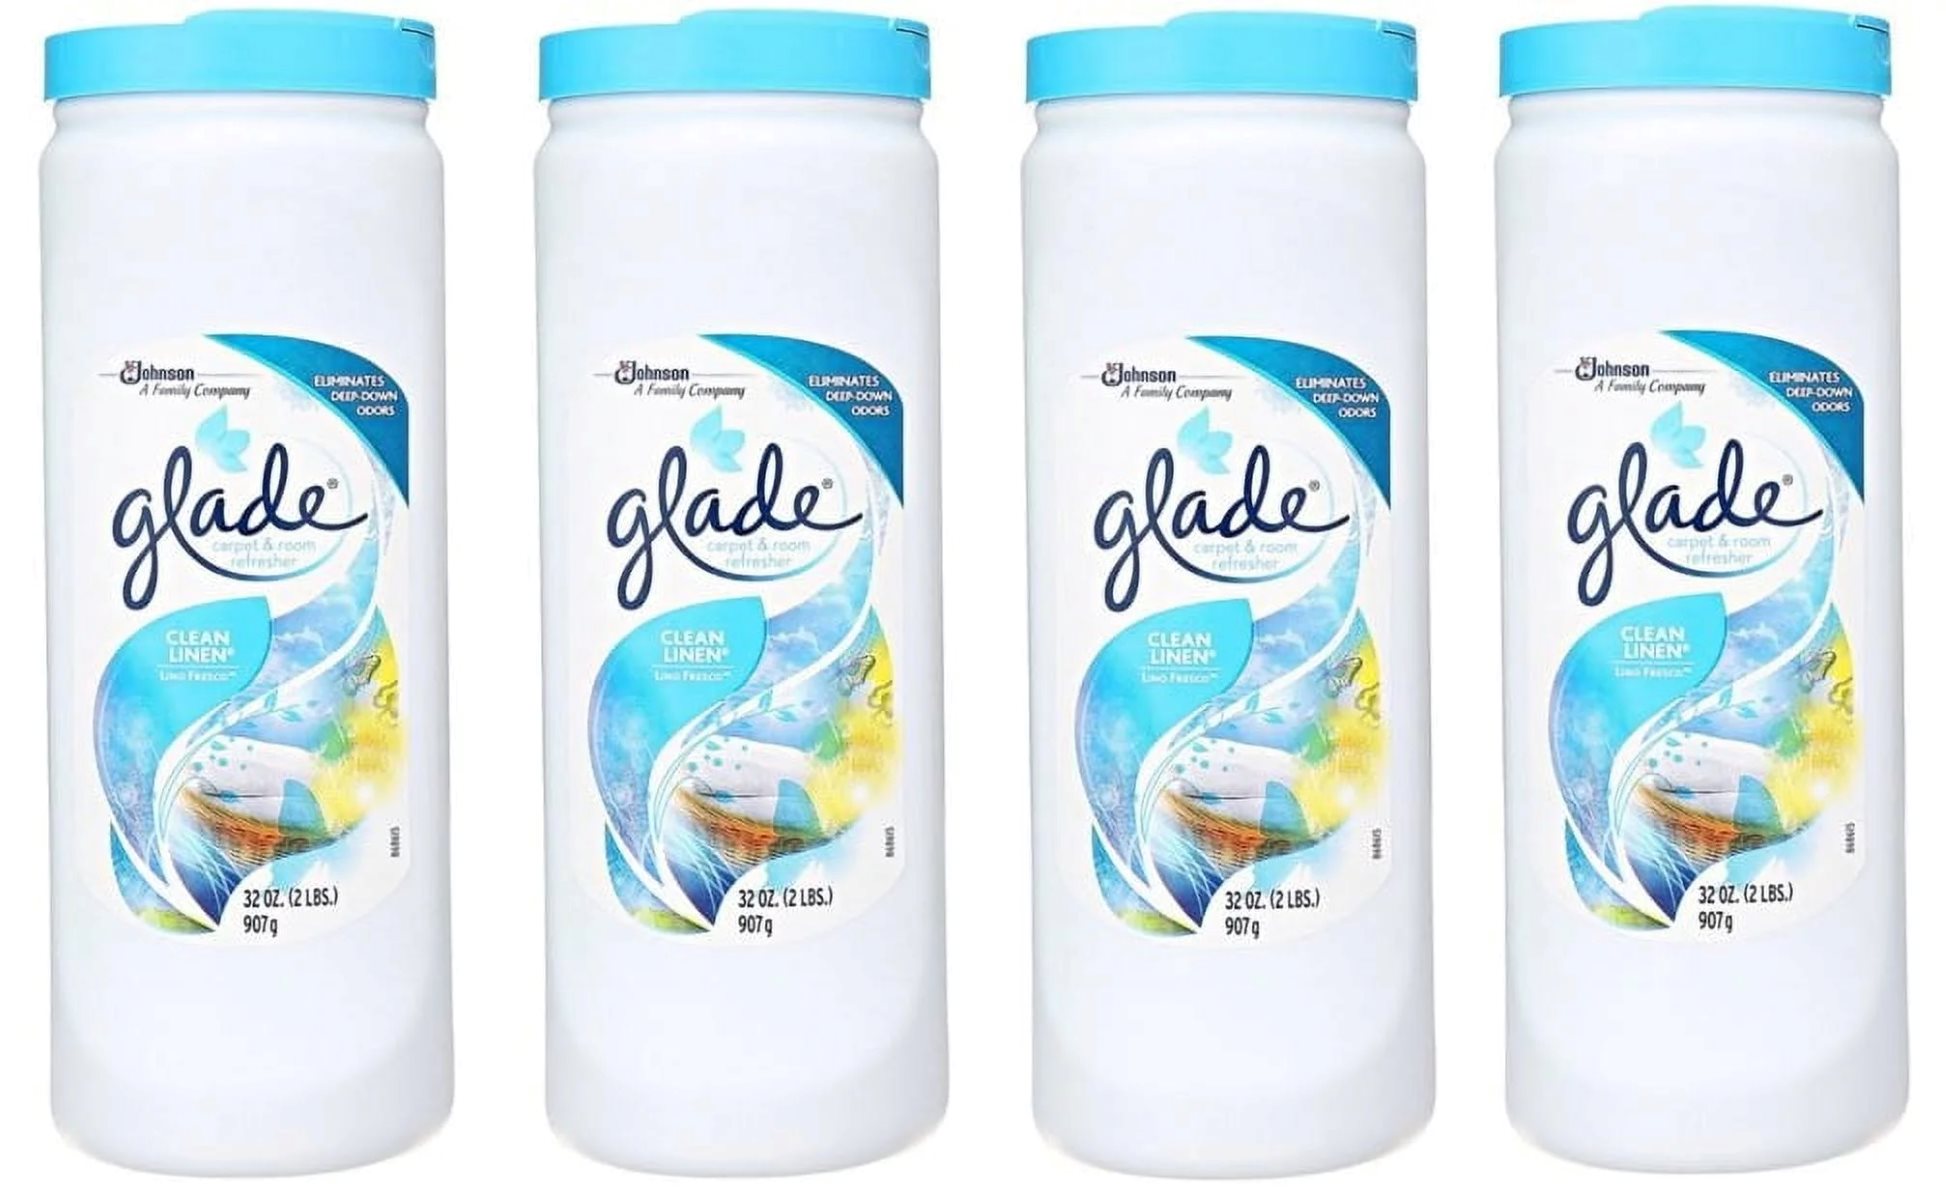 What Is In Glade Carpet And Room Deodorizer?